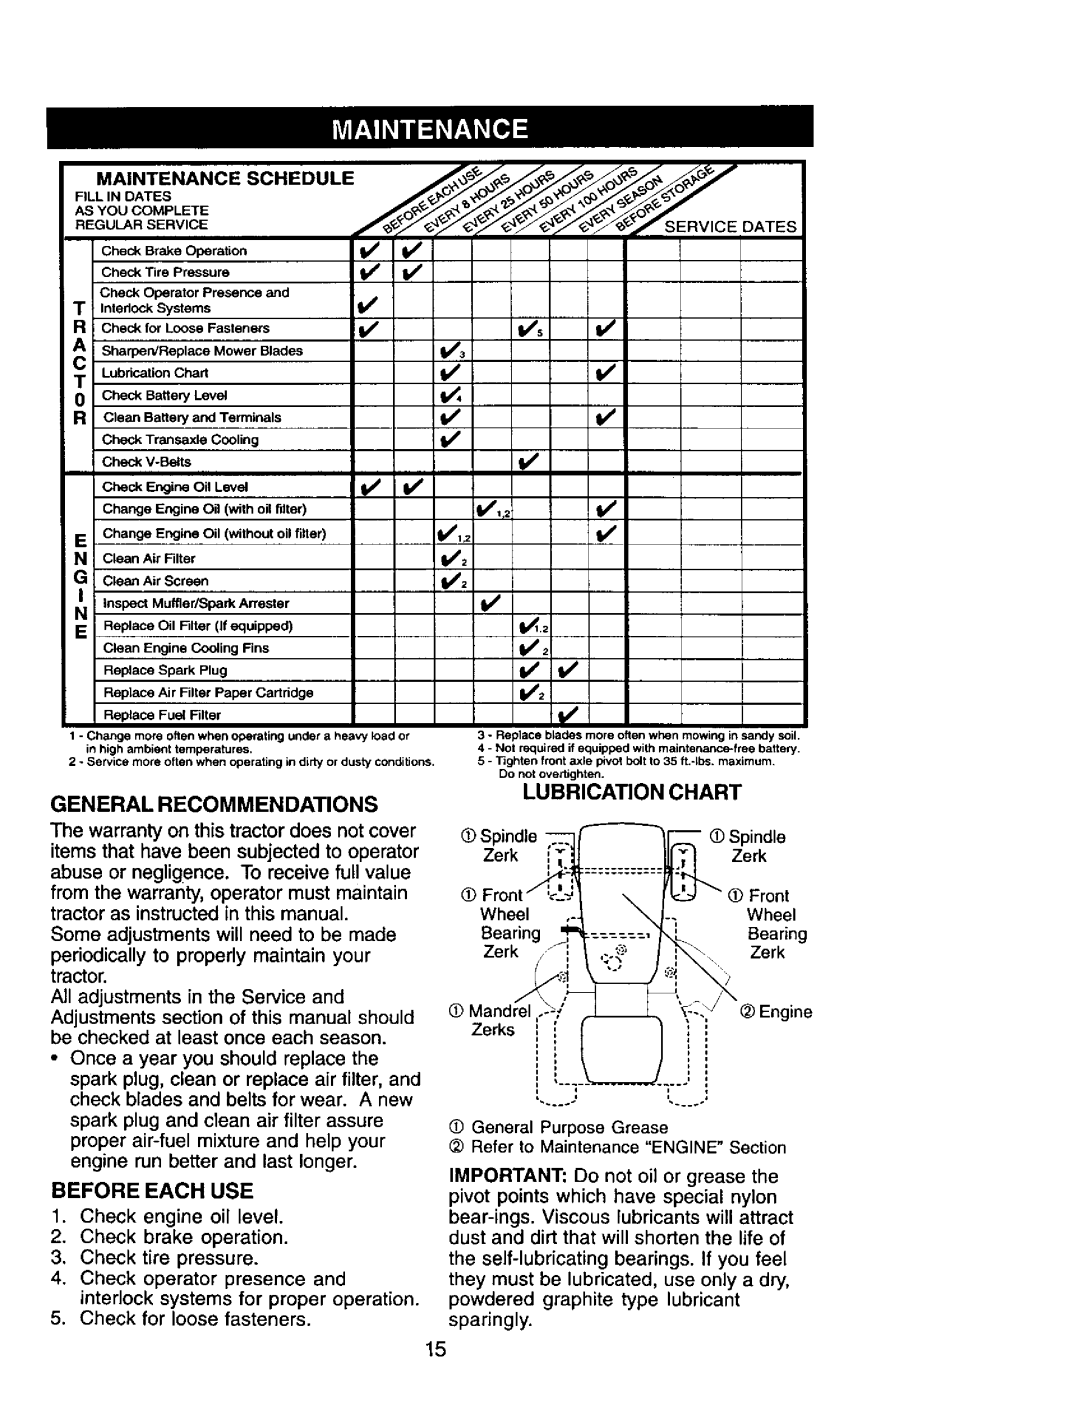 Craftsman 917.272247 owner manual Ma,Ntenancscr Du, General Recommendations, Lubrication, Chart 